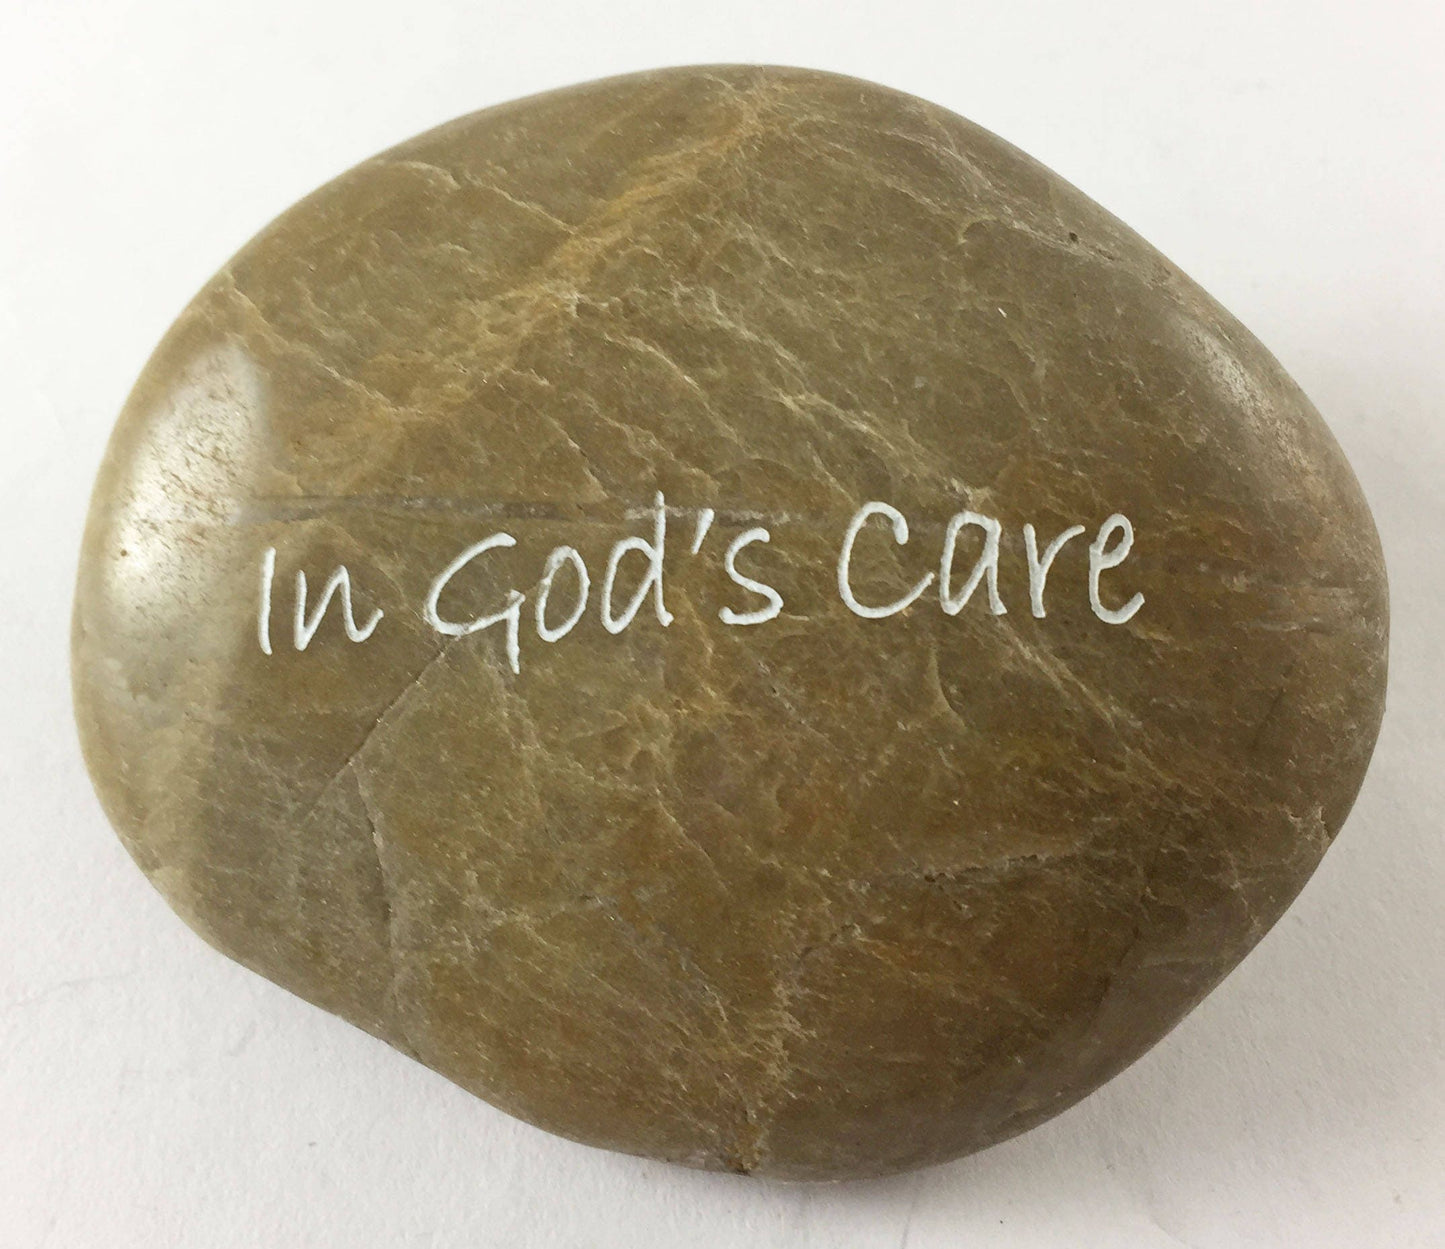 In God's Care - Engraved River Rock Inspirational Word Stone